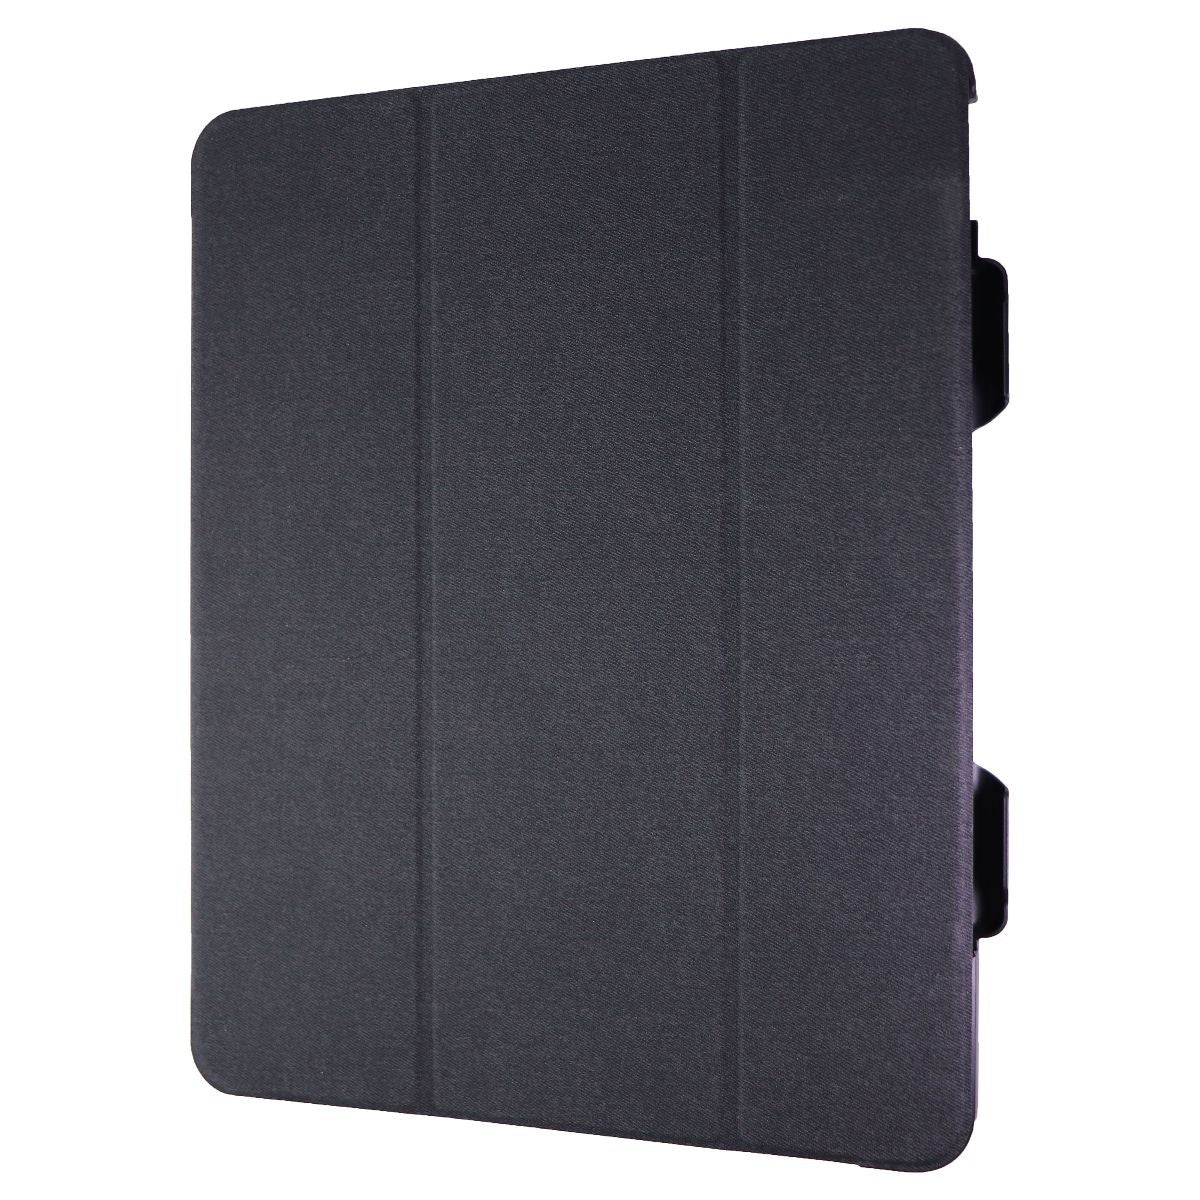 Verizon Hard Folio Case + Glass Screen Protector for iPad Pro 12.9 3rd Gen Black iPad/Tablet Accessories - Cases, Covers, Keyboard Folios Verizon    - Simple Cell Bulk Wholesale Pricing - USA Seller